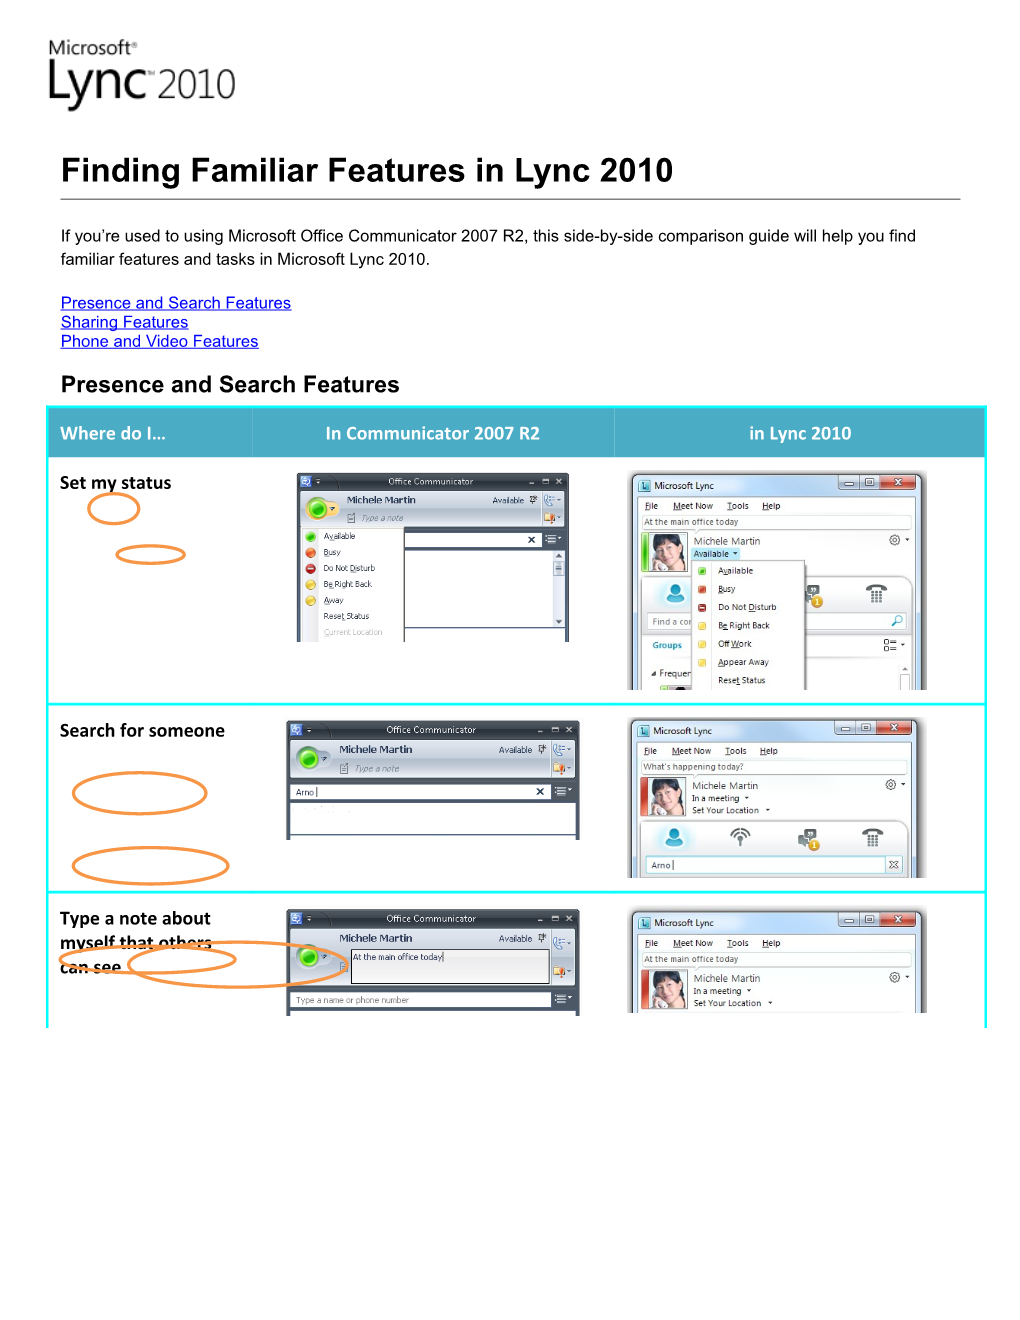 Finding Familiar Features in Lync 2010